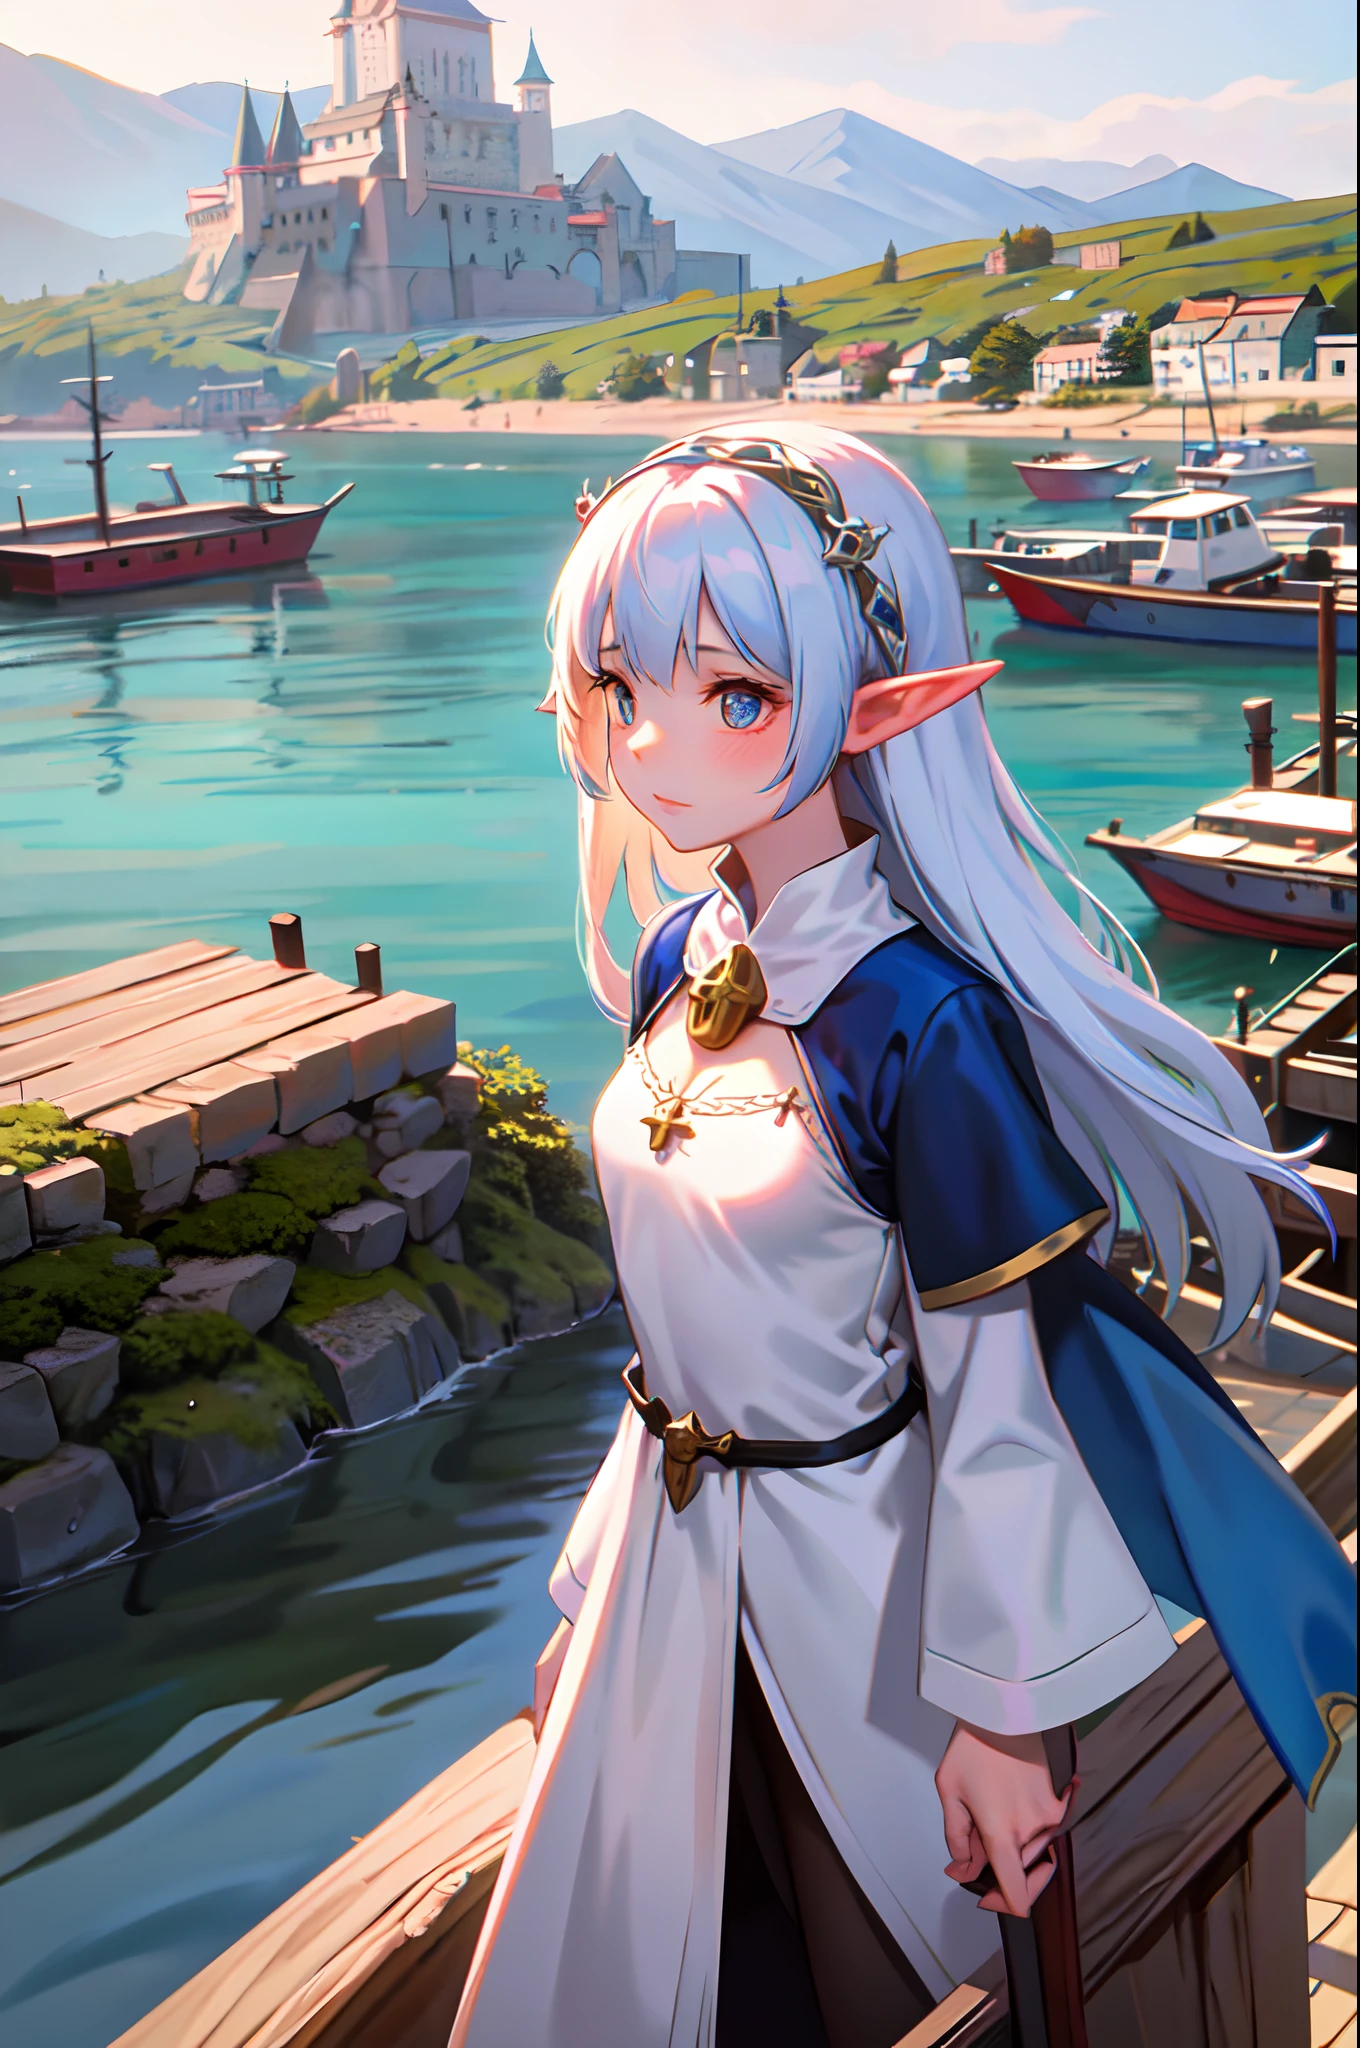 elf girl at the pier, (high fantasy, medieval:1.4), feudal society, lake town, waterfront, wooden boats, upper body, hands up